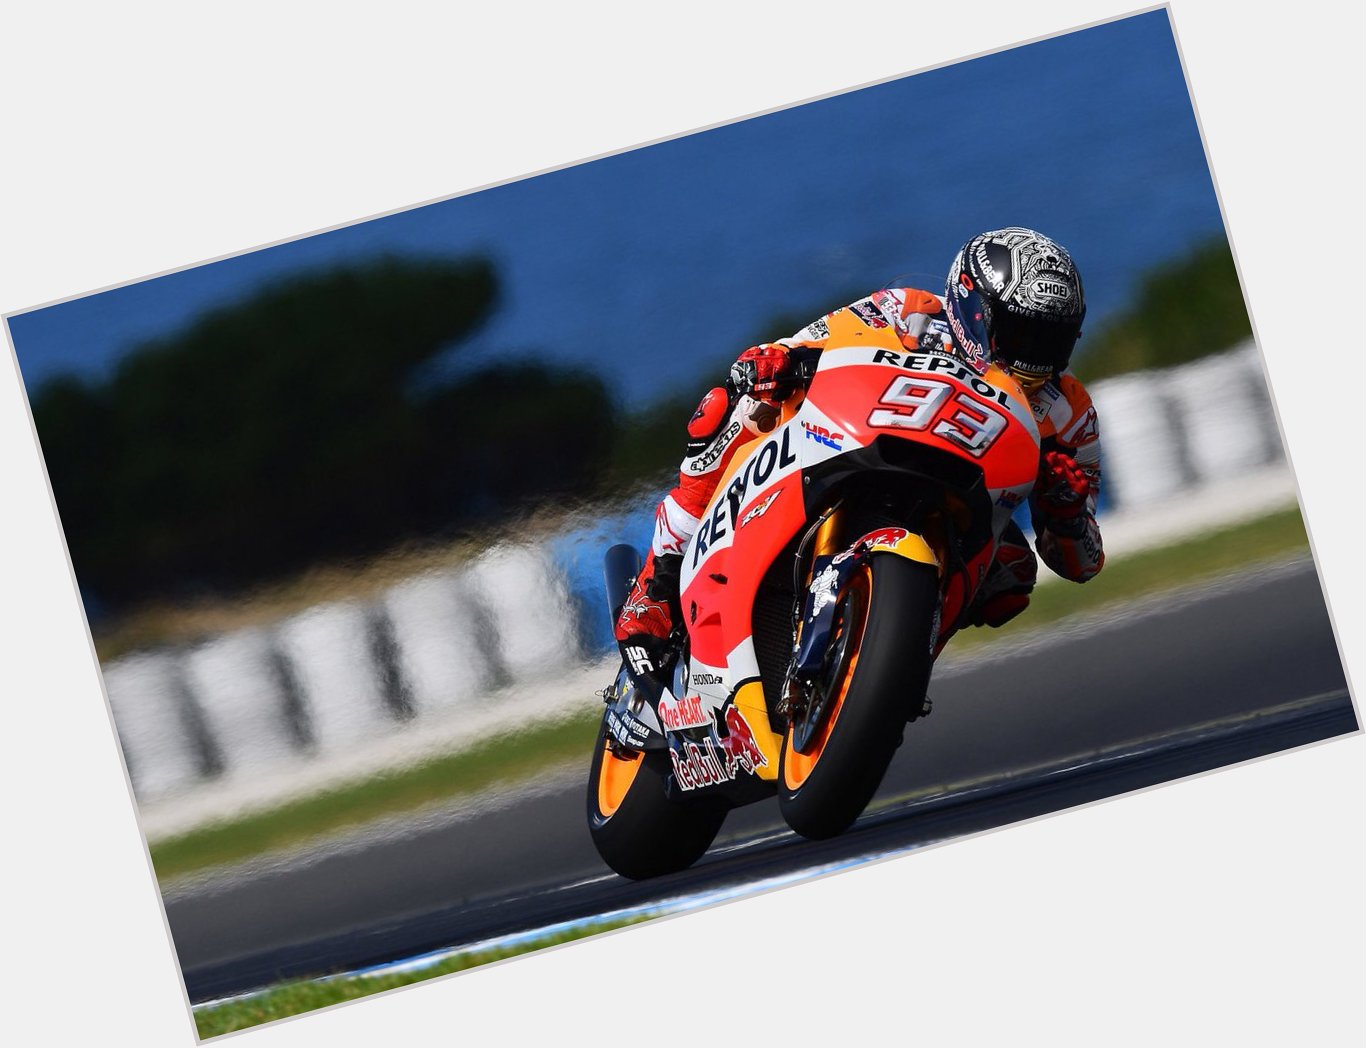 Happy Birthday to five-time World Champion Marc Marquez! He turns 24 today   